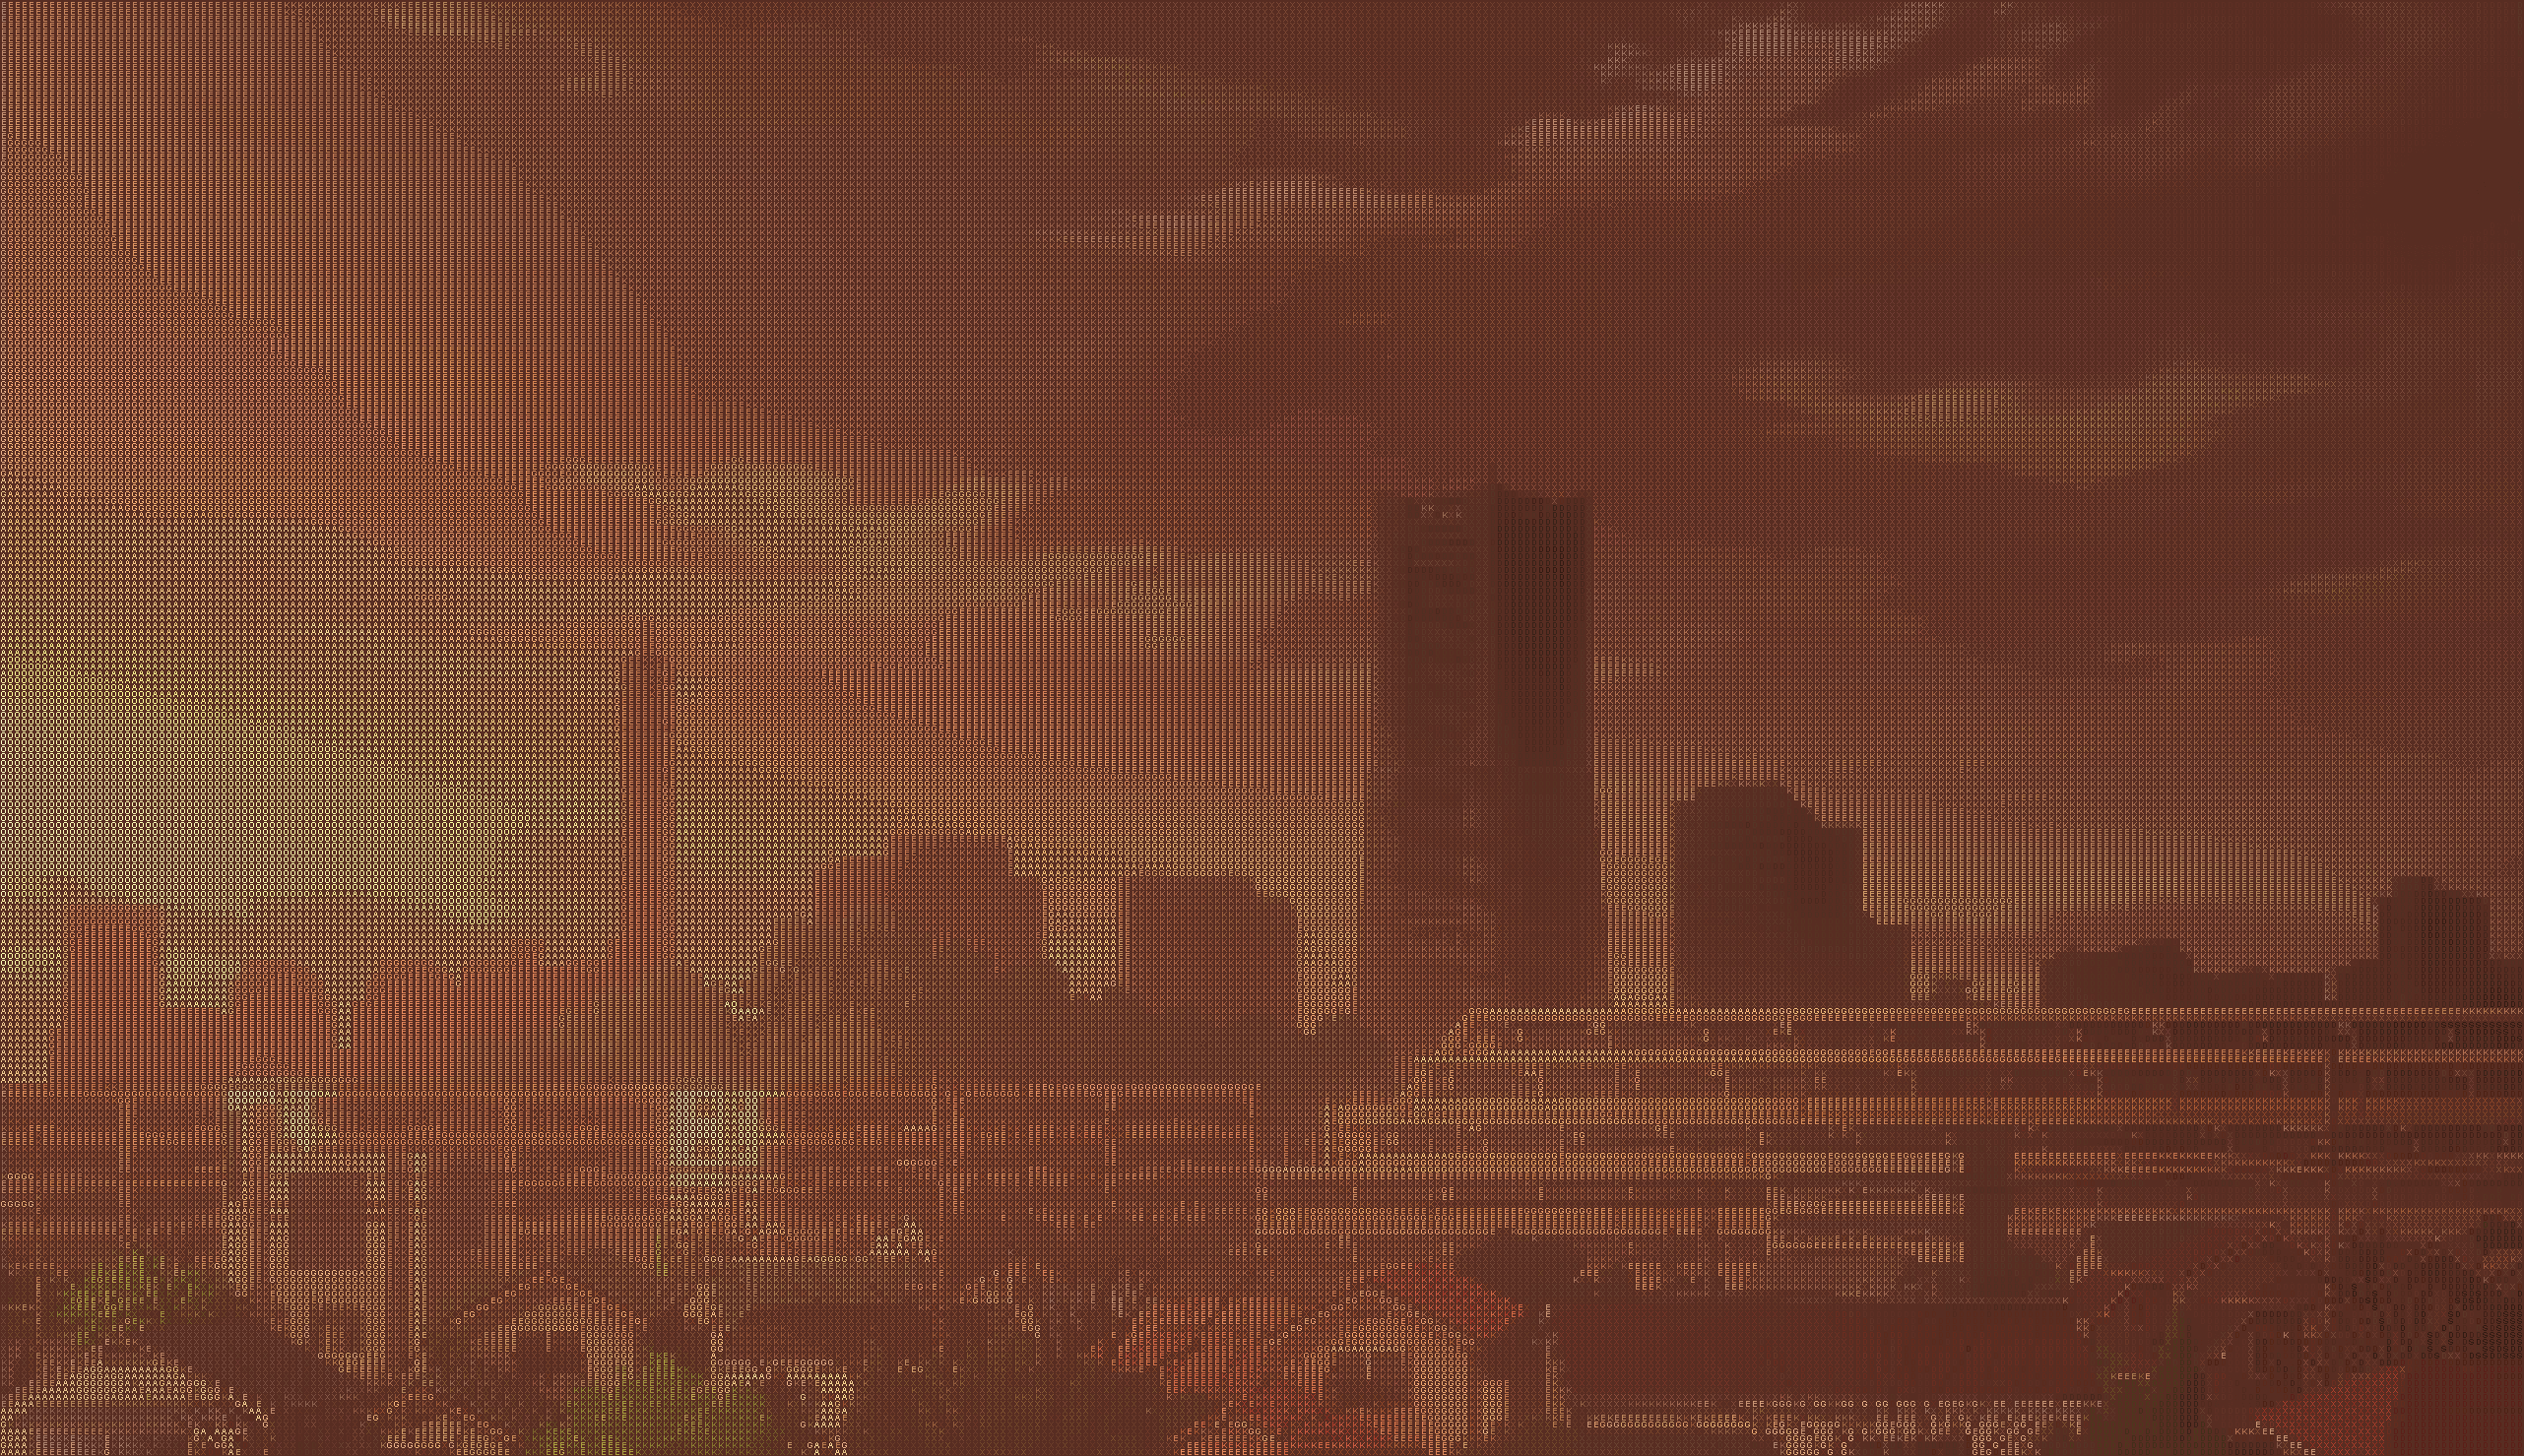 Some wallpaper converted to ASCII